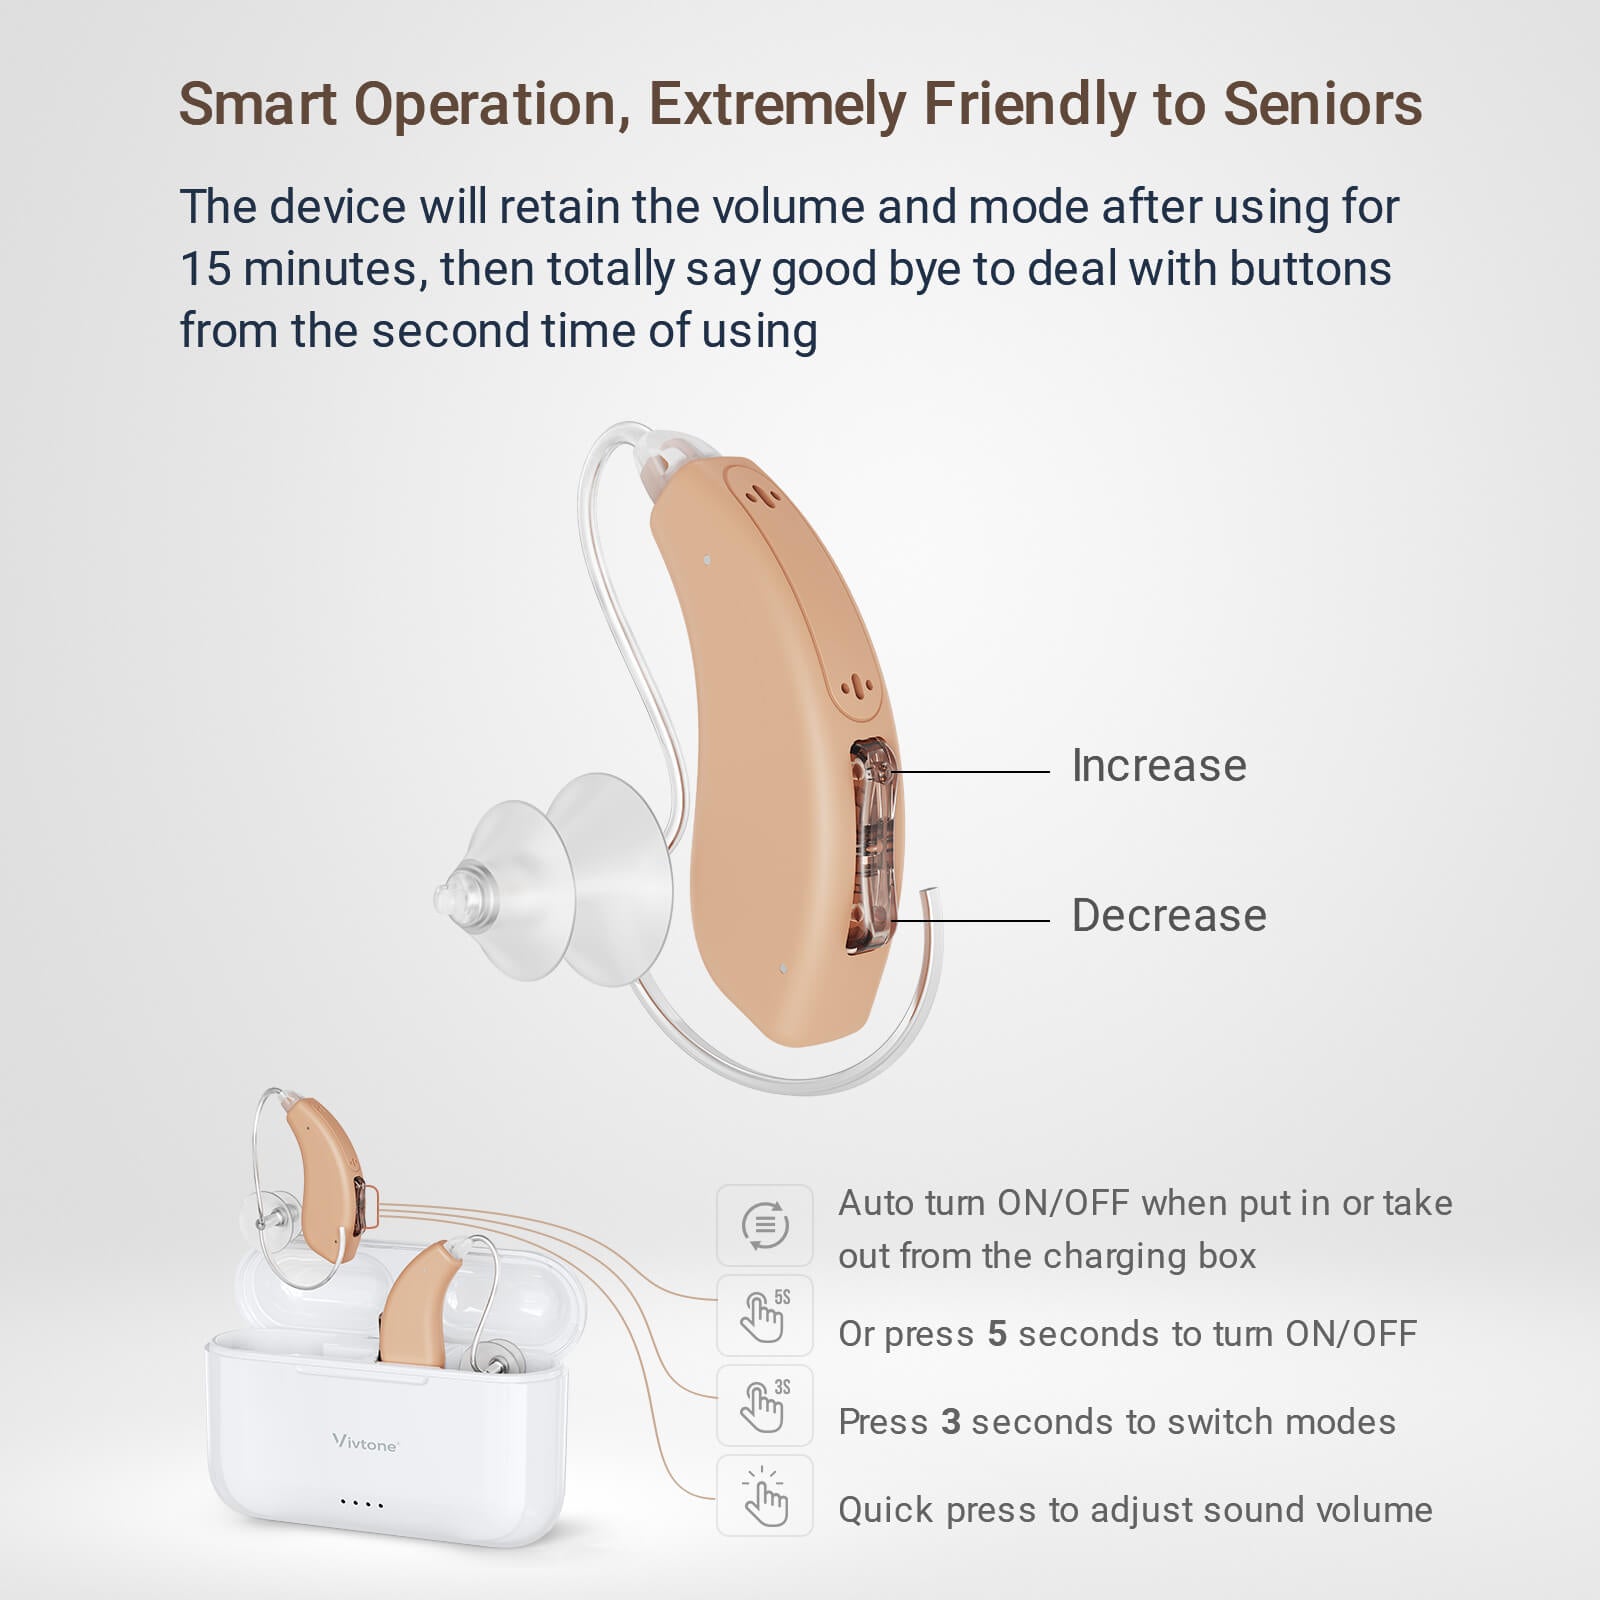 Best Rated Hearing Aids with Top Over-the-Counter Technology for 2023-Vivtone Lucid508j